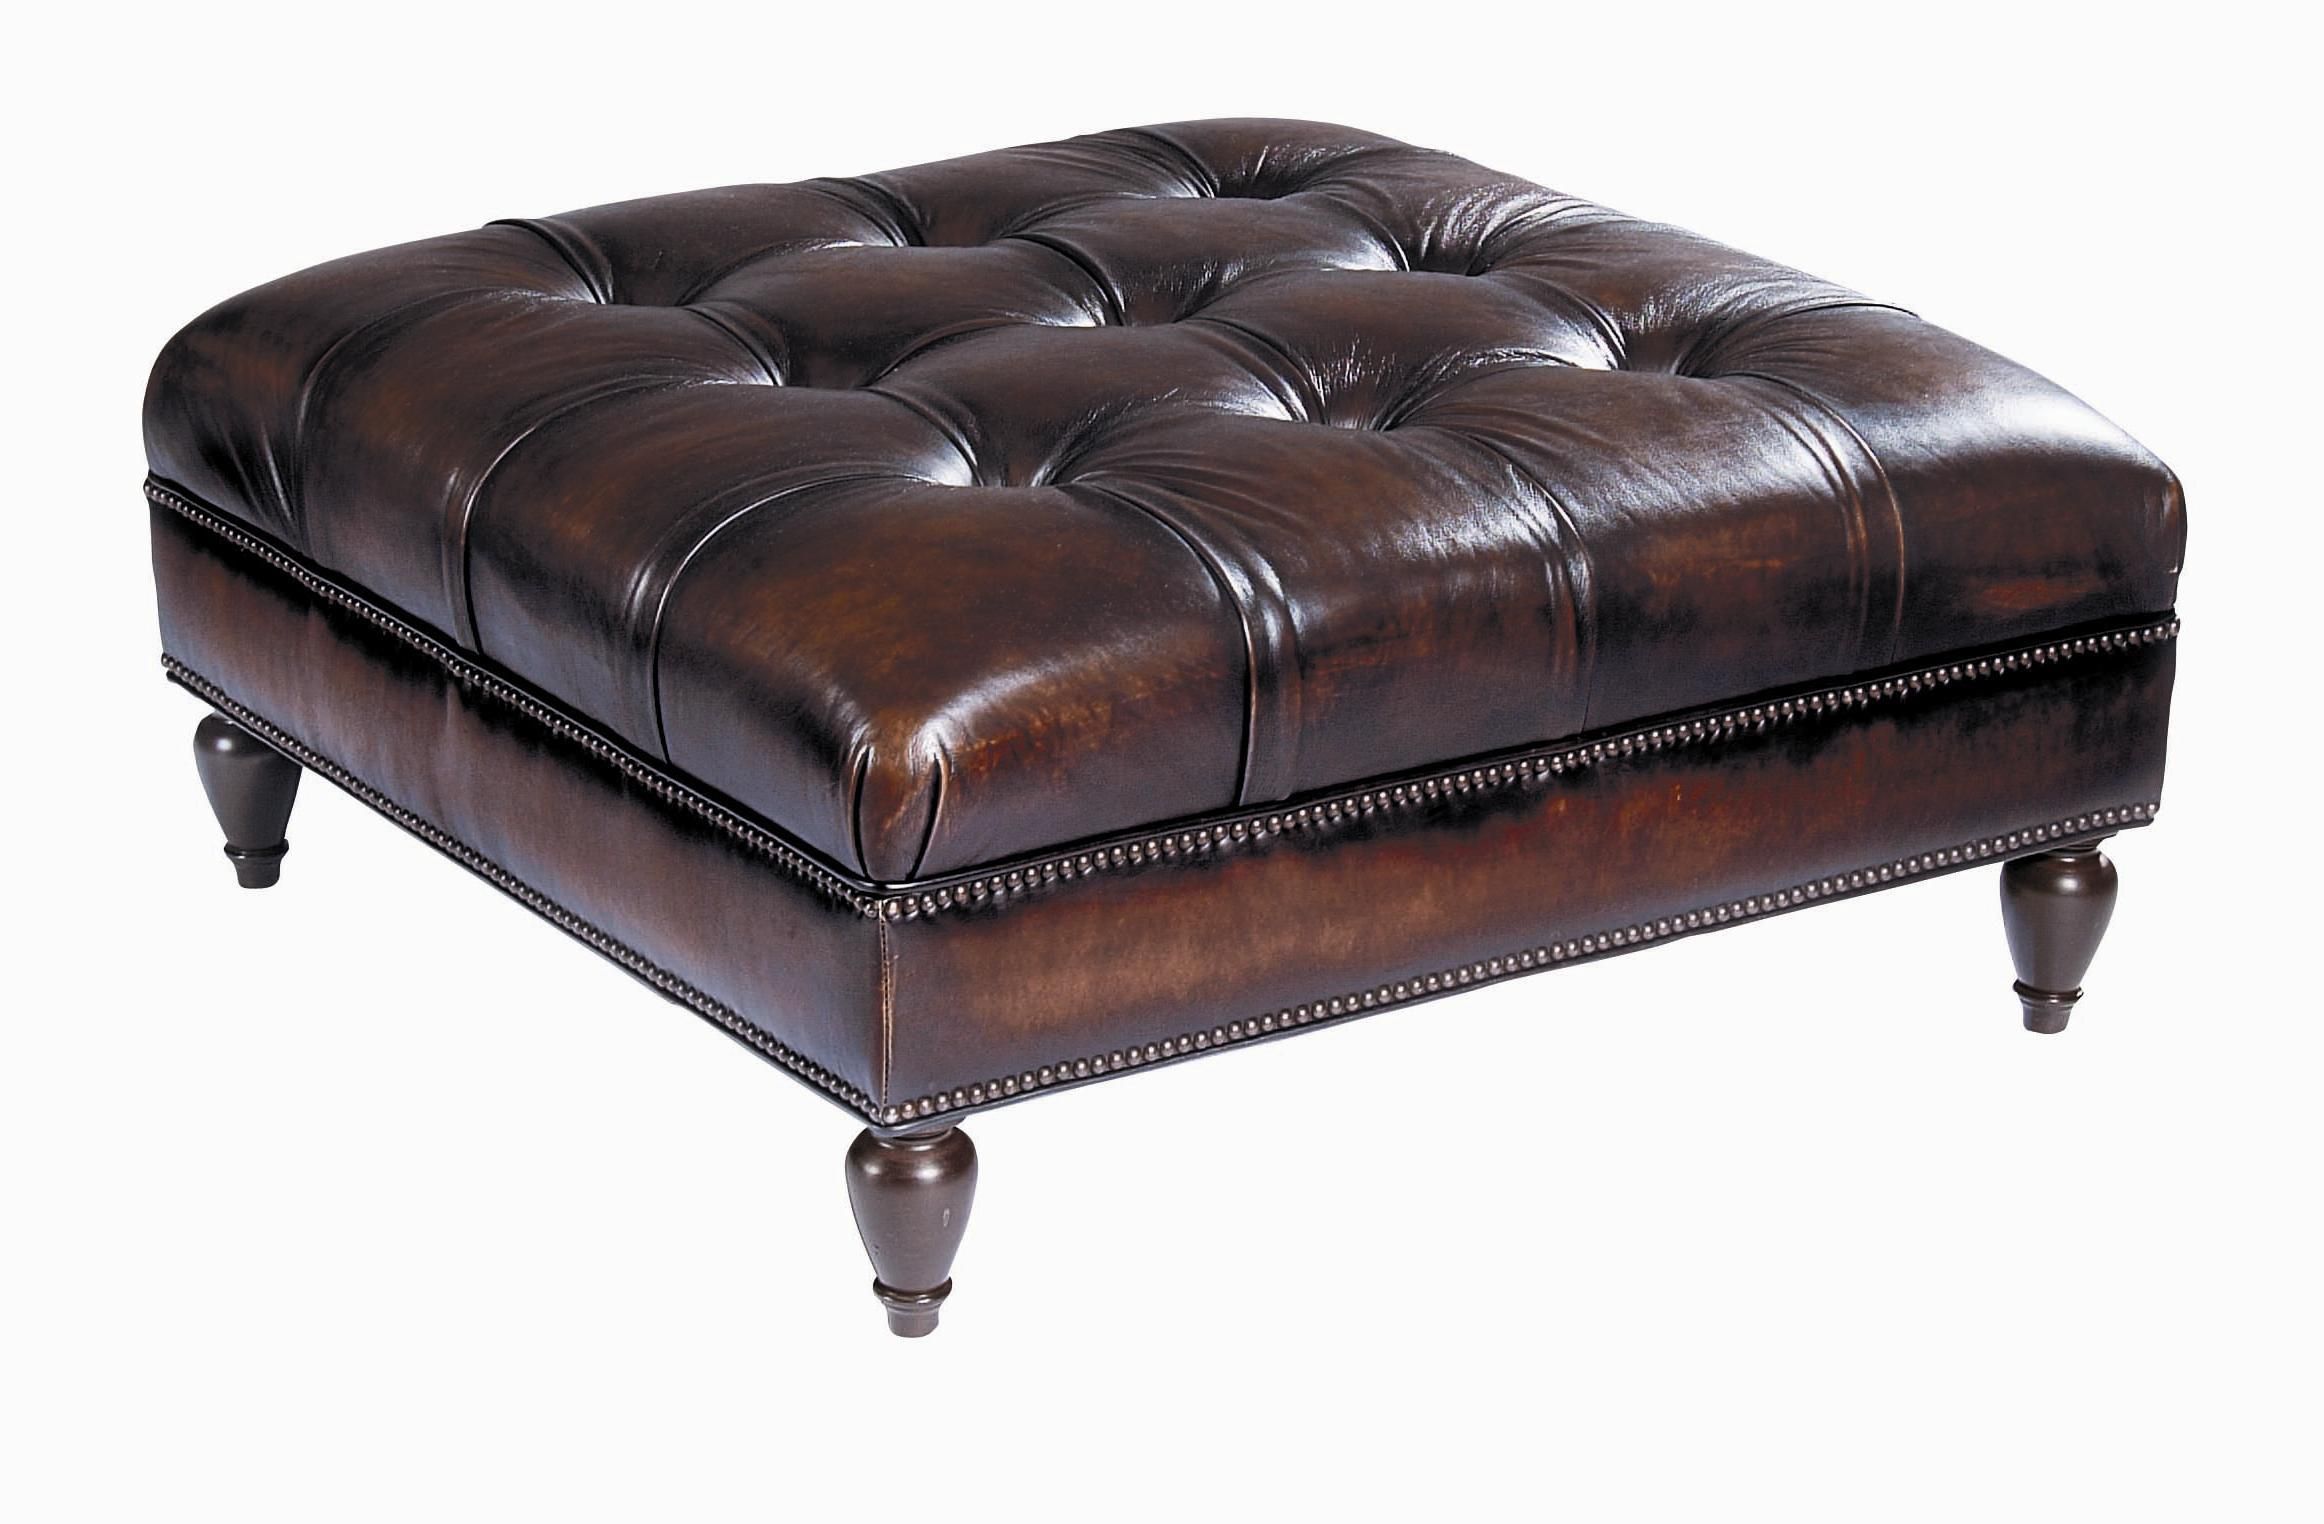 Bernhardt Colston Square Ottoman | Story & Lee Furniture | Ottomans Throughout Caramel Leather And Bronze Steel Tufted Square Ottomans (View 15 of 20)